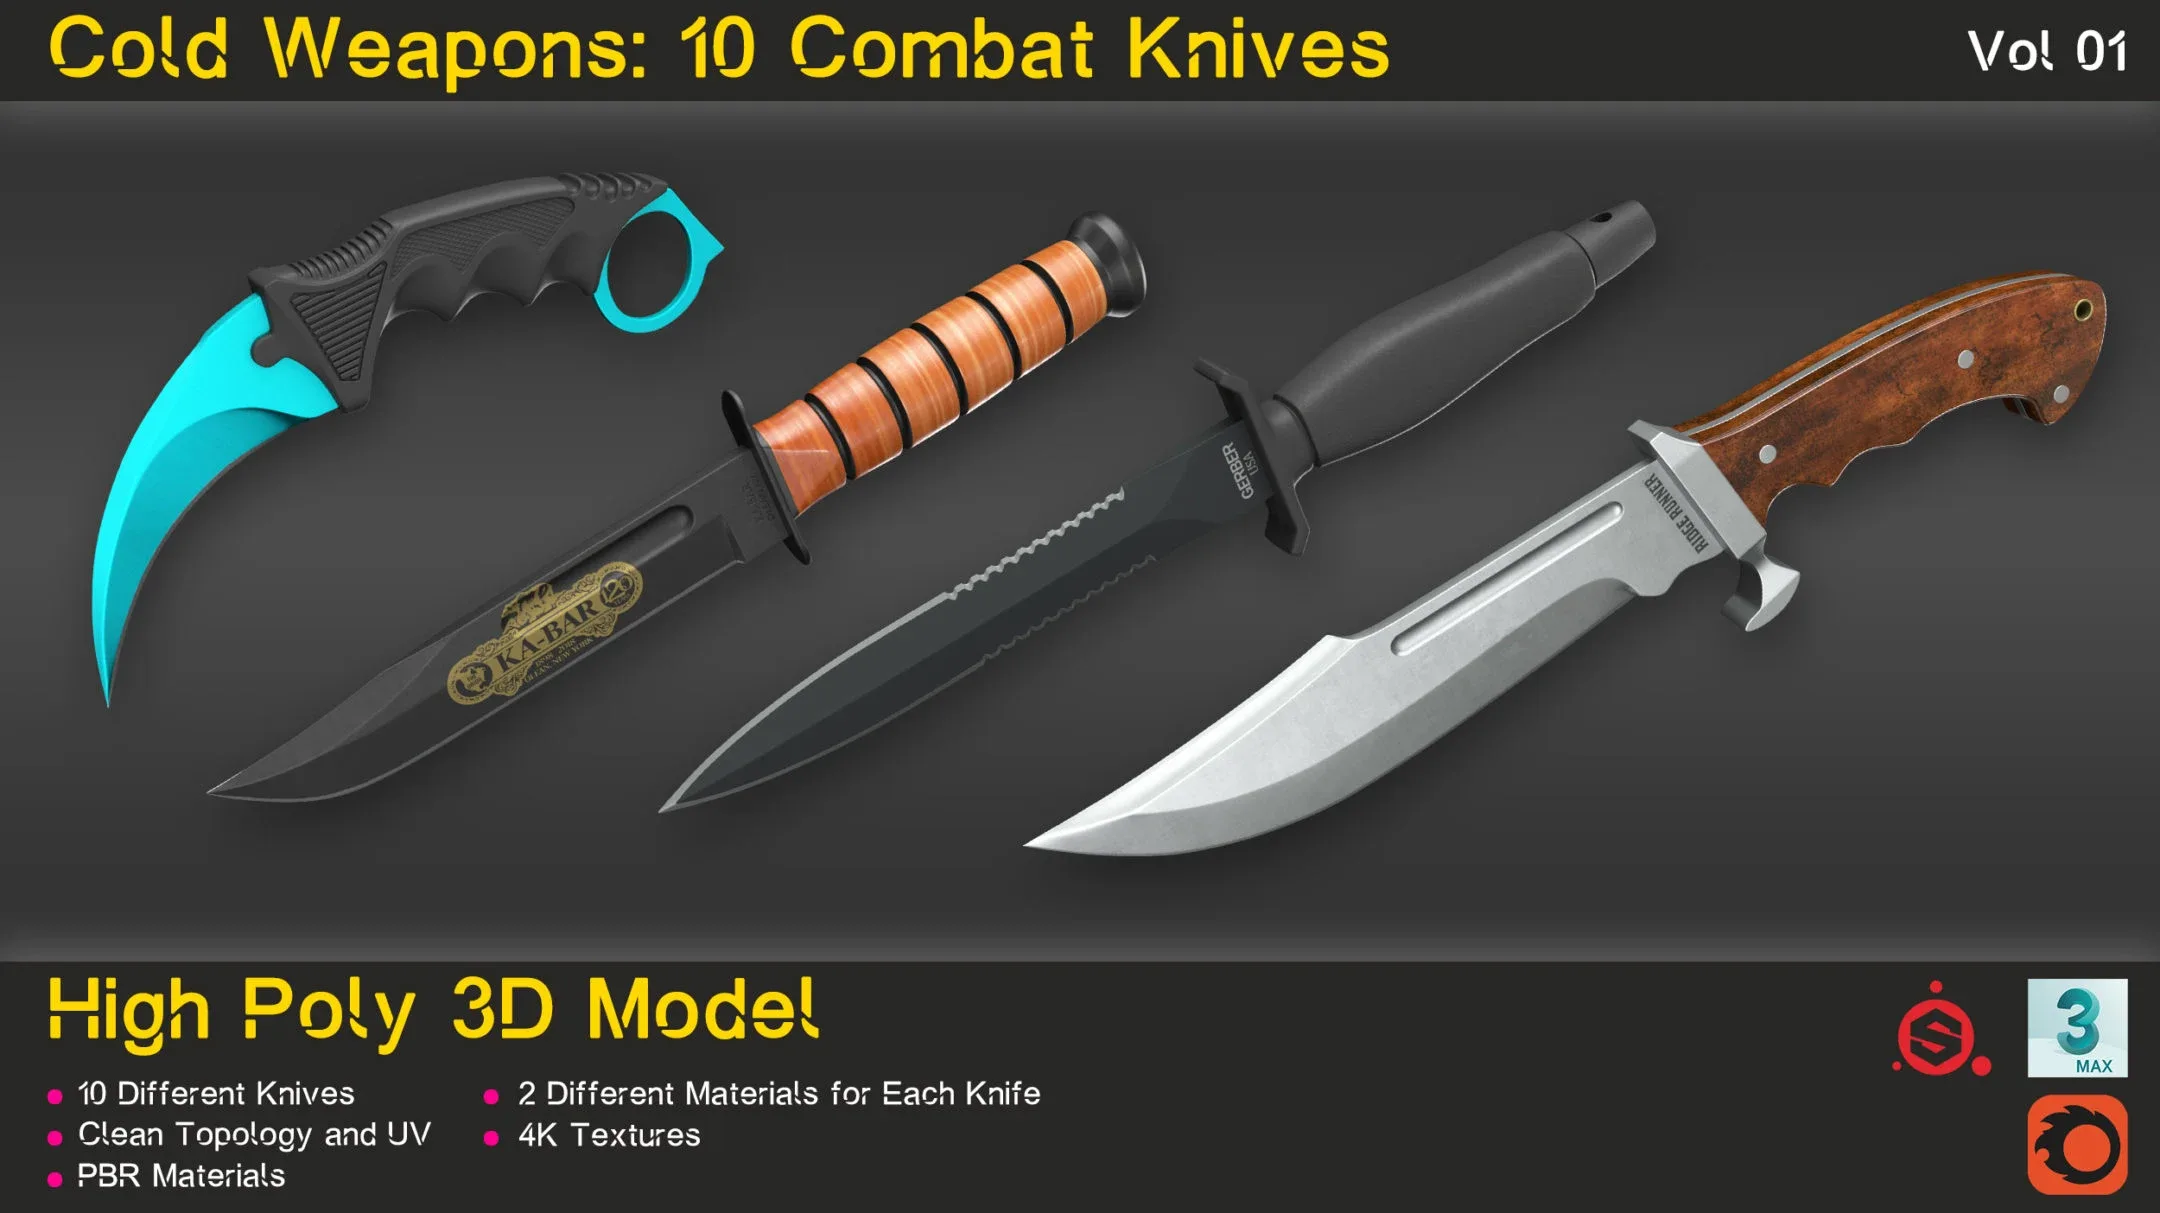 Cold Weapons: 10 Combat Knives (Vol 01)